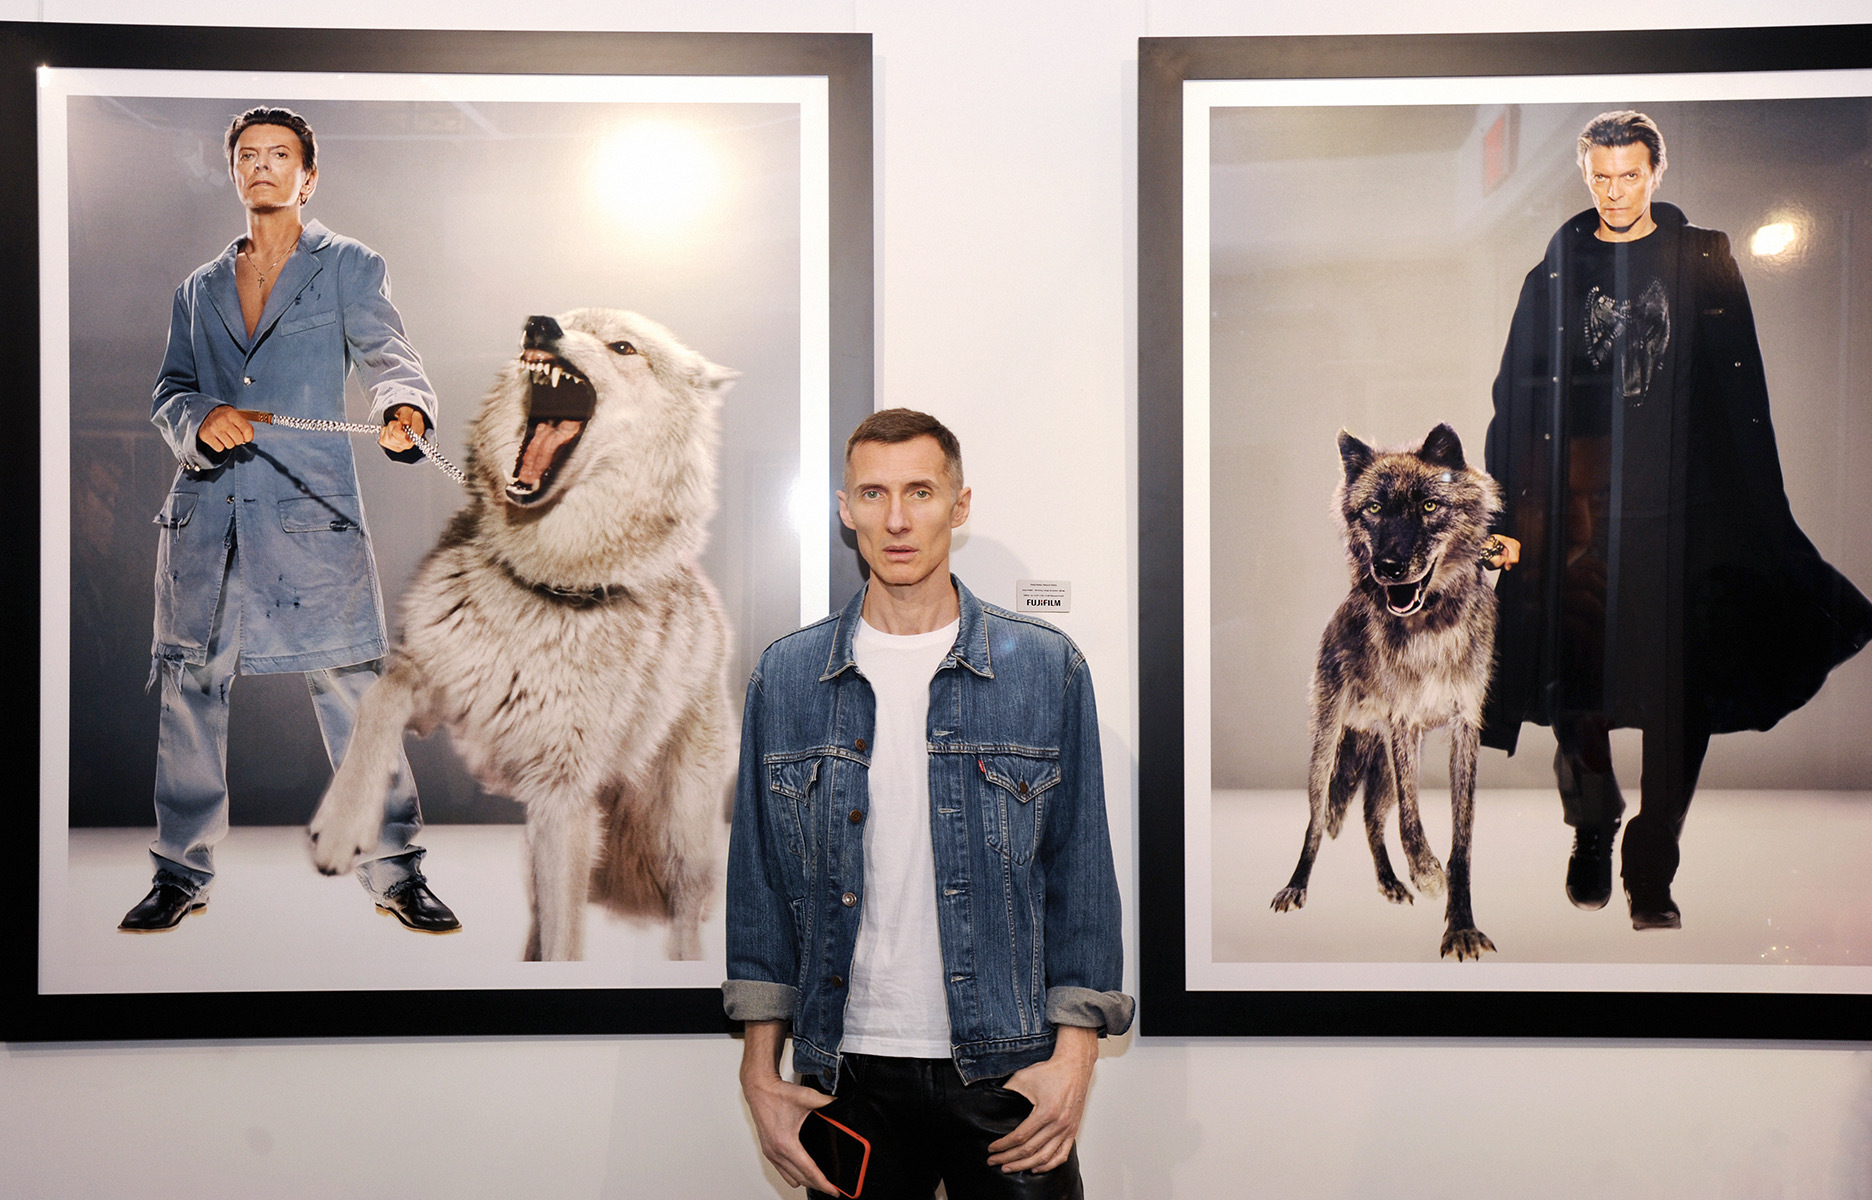 Photographer Makus Klinko with his photographs in the 2019 London exhibition 